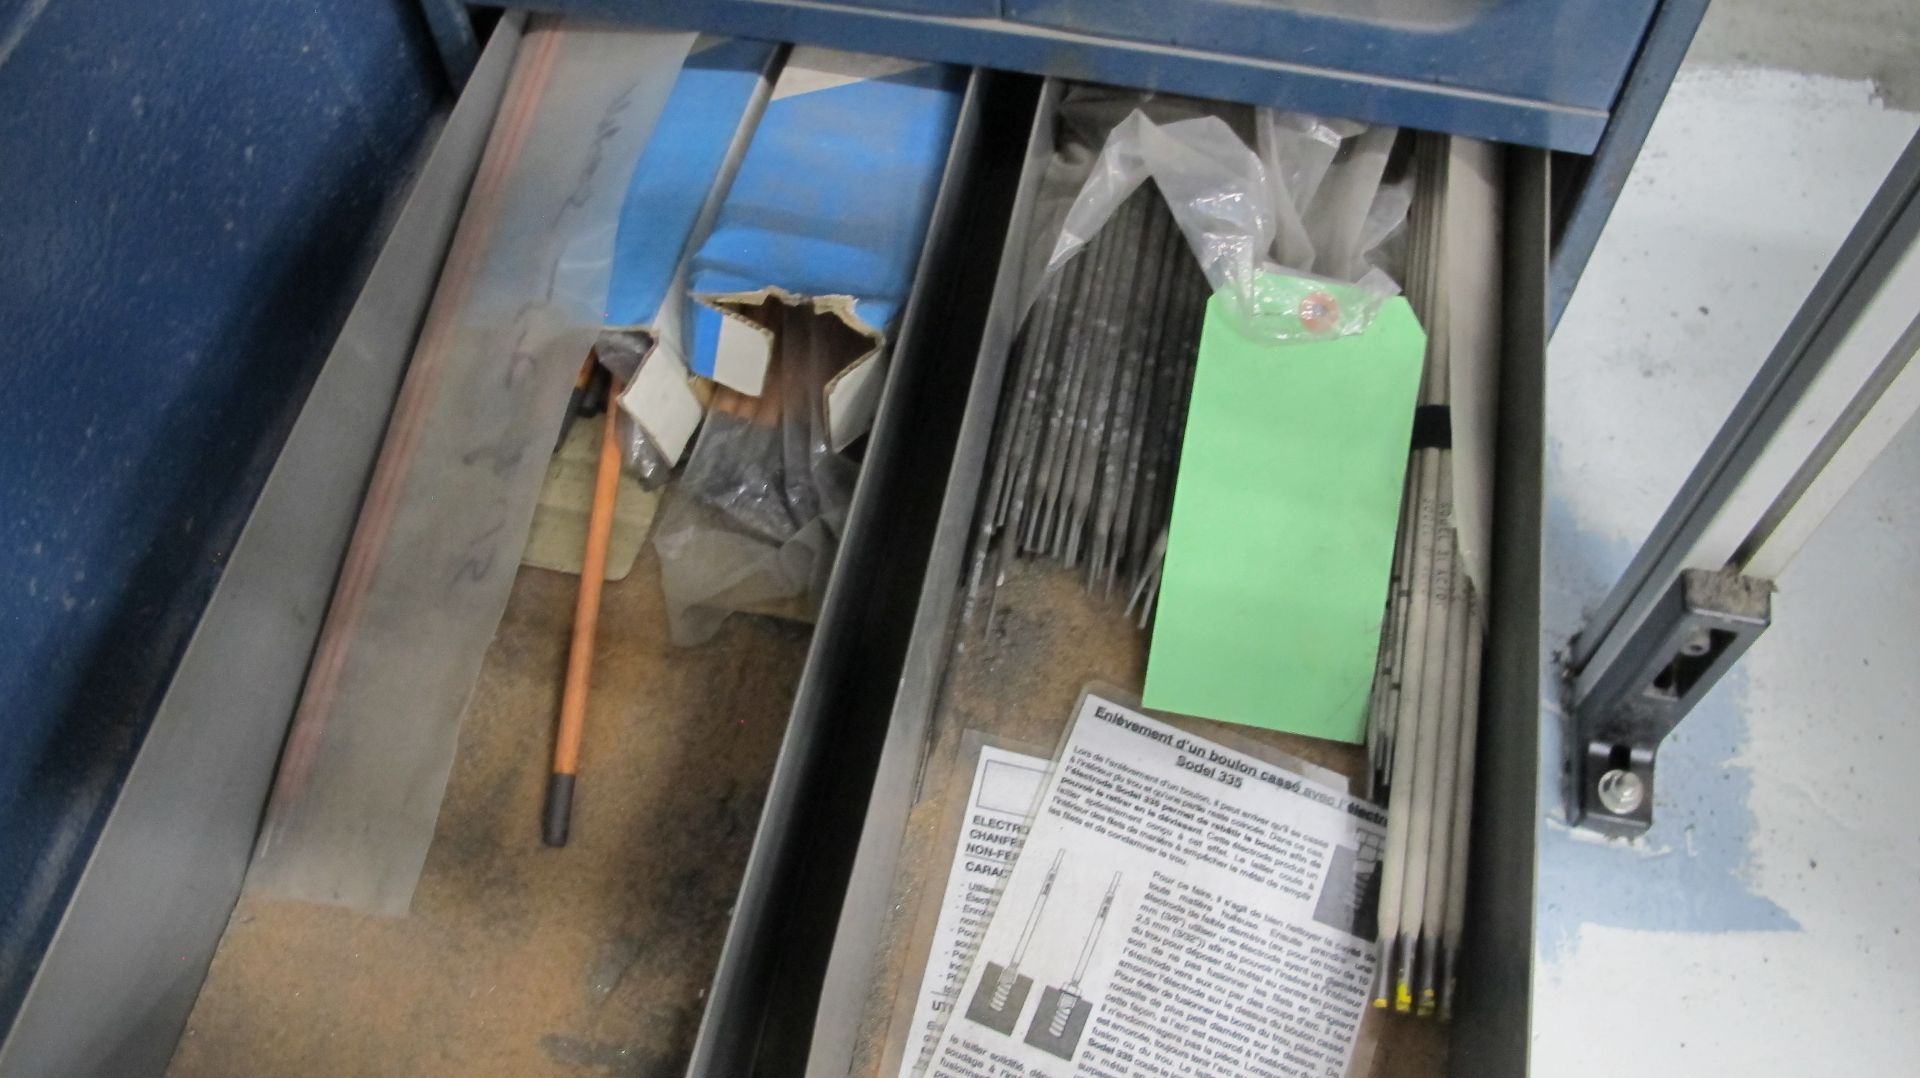 LOT OF WELDING ELECTRODES IN 10-LEVEL STORAGE CABINET AND WELDING SUPPLIES IN 2ND 10-LEVEL STORAGE - Image 9 of 14